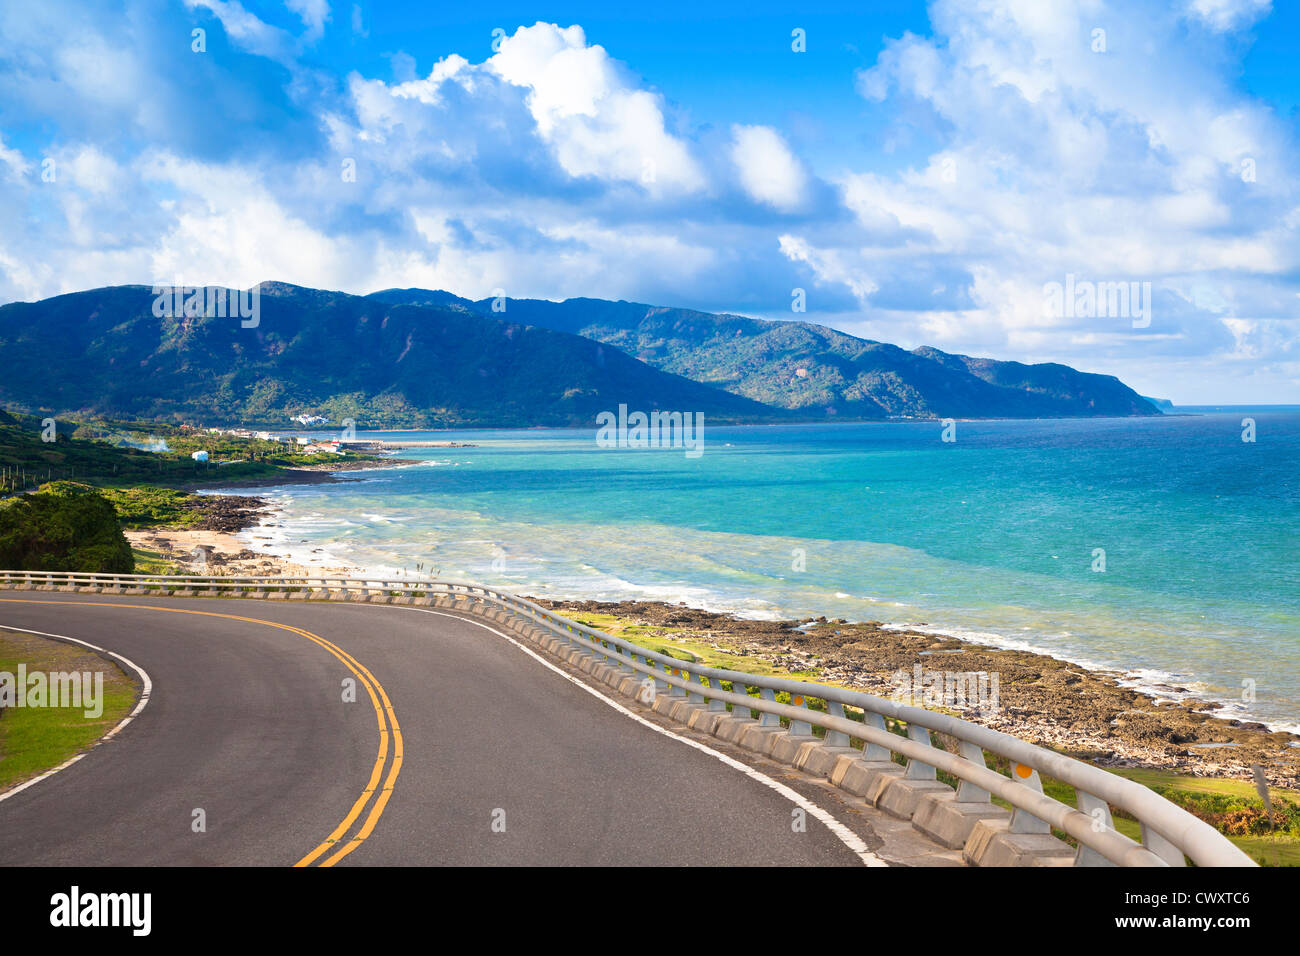 coastline of kenting national park in taiwan Stock Photo